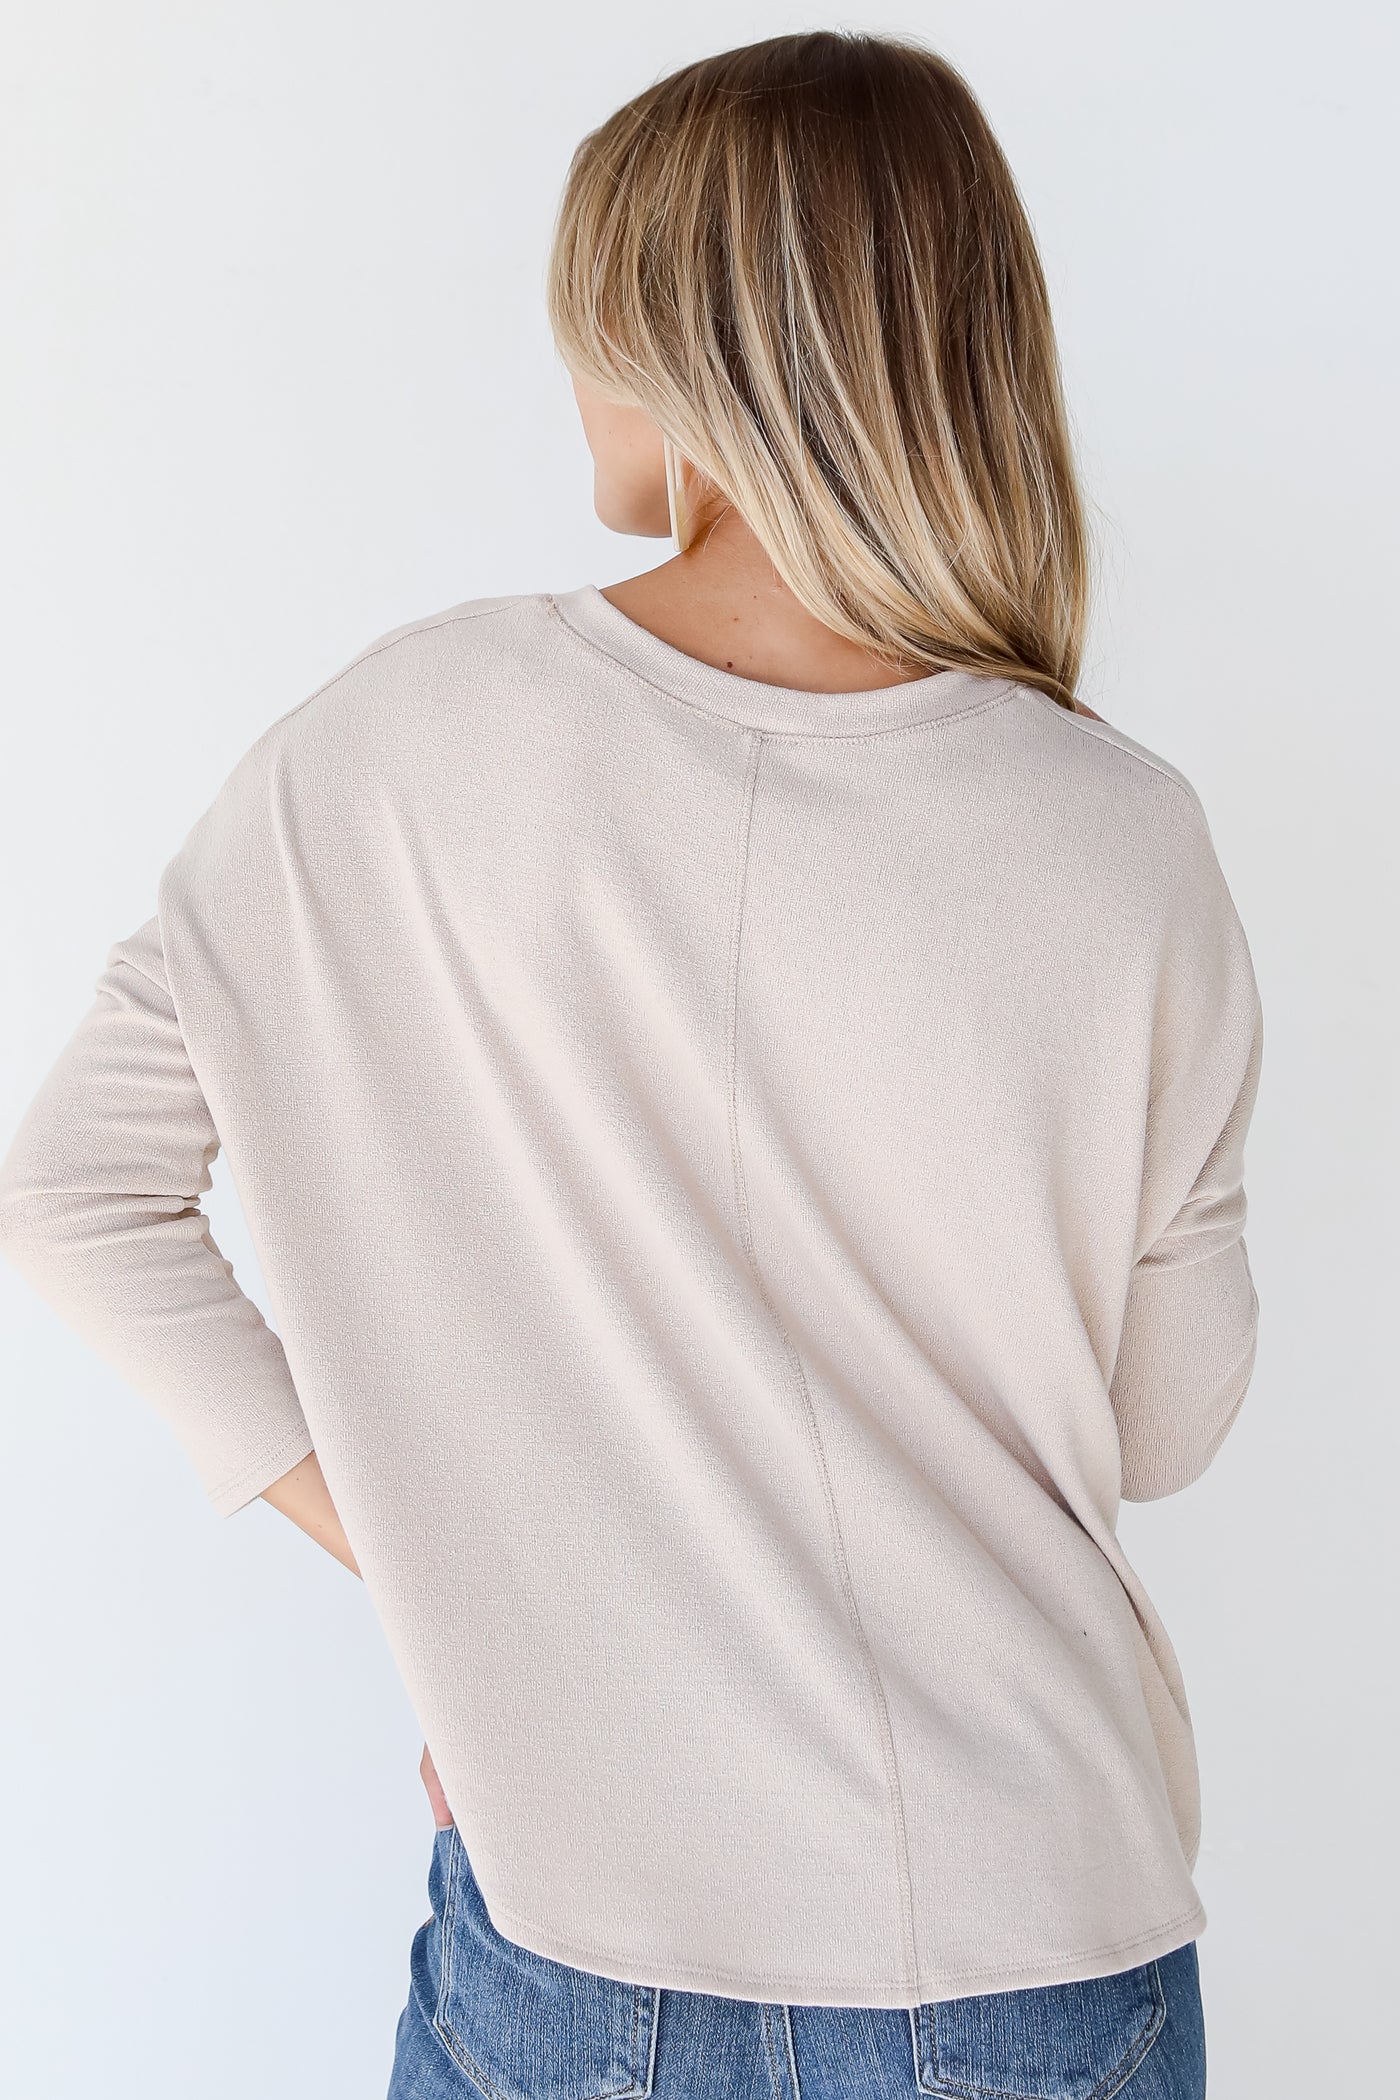 Knit Top back view